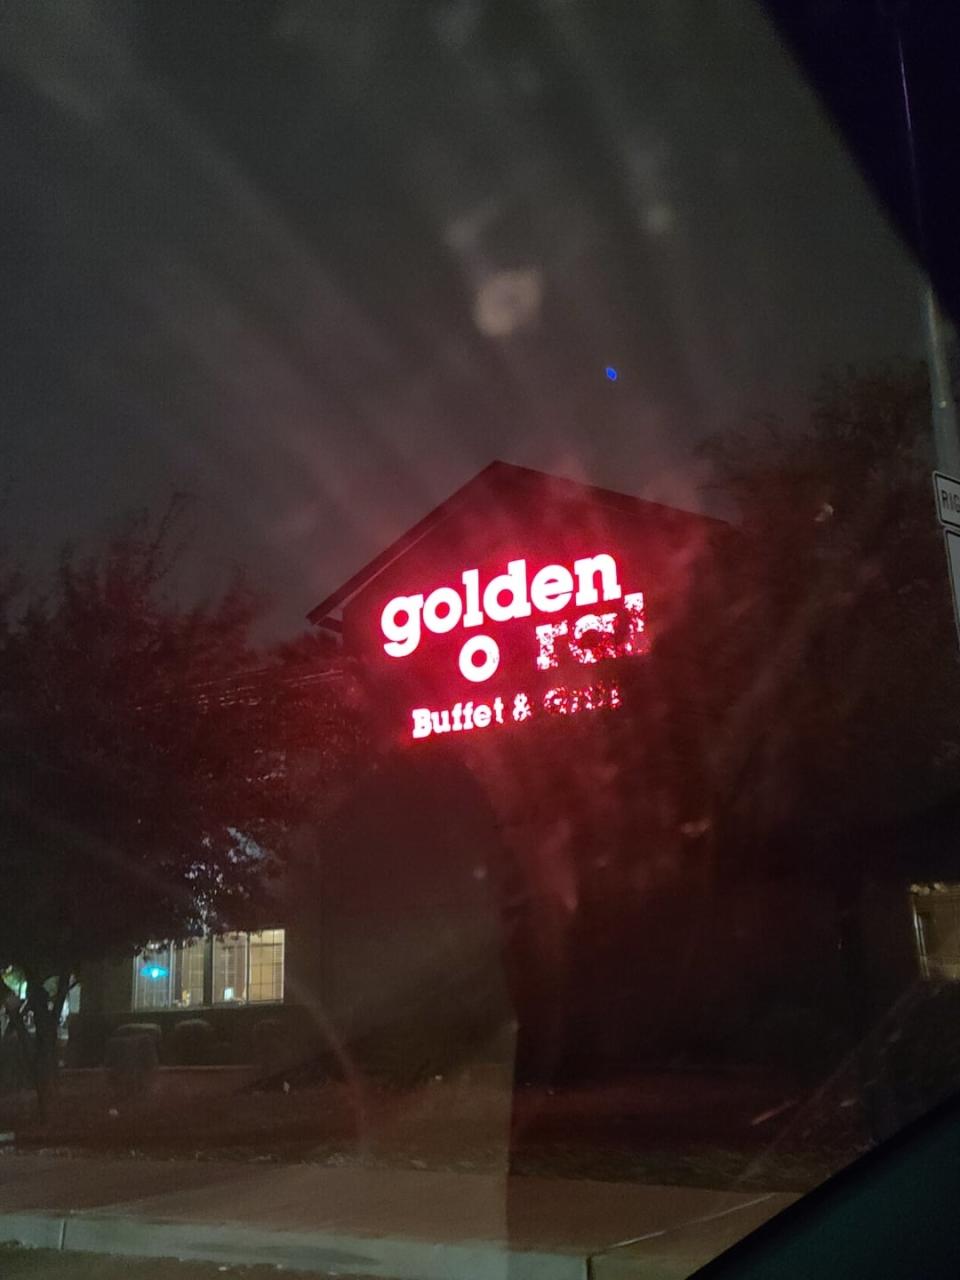 Neon sign of 'Golden Corral Buffet & Grill' reads "golden oral"